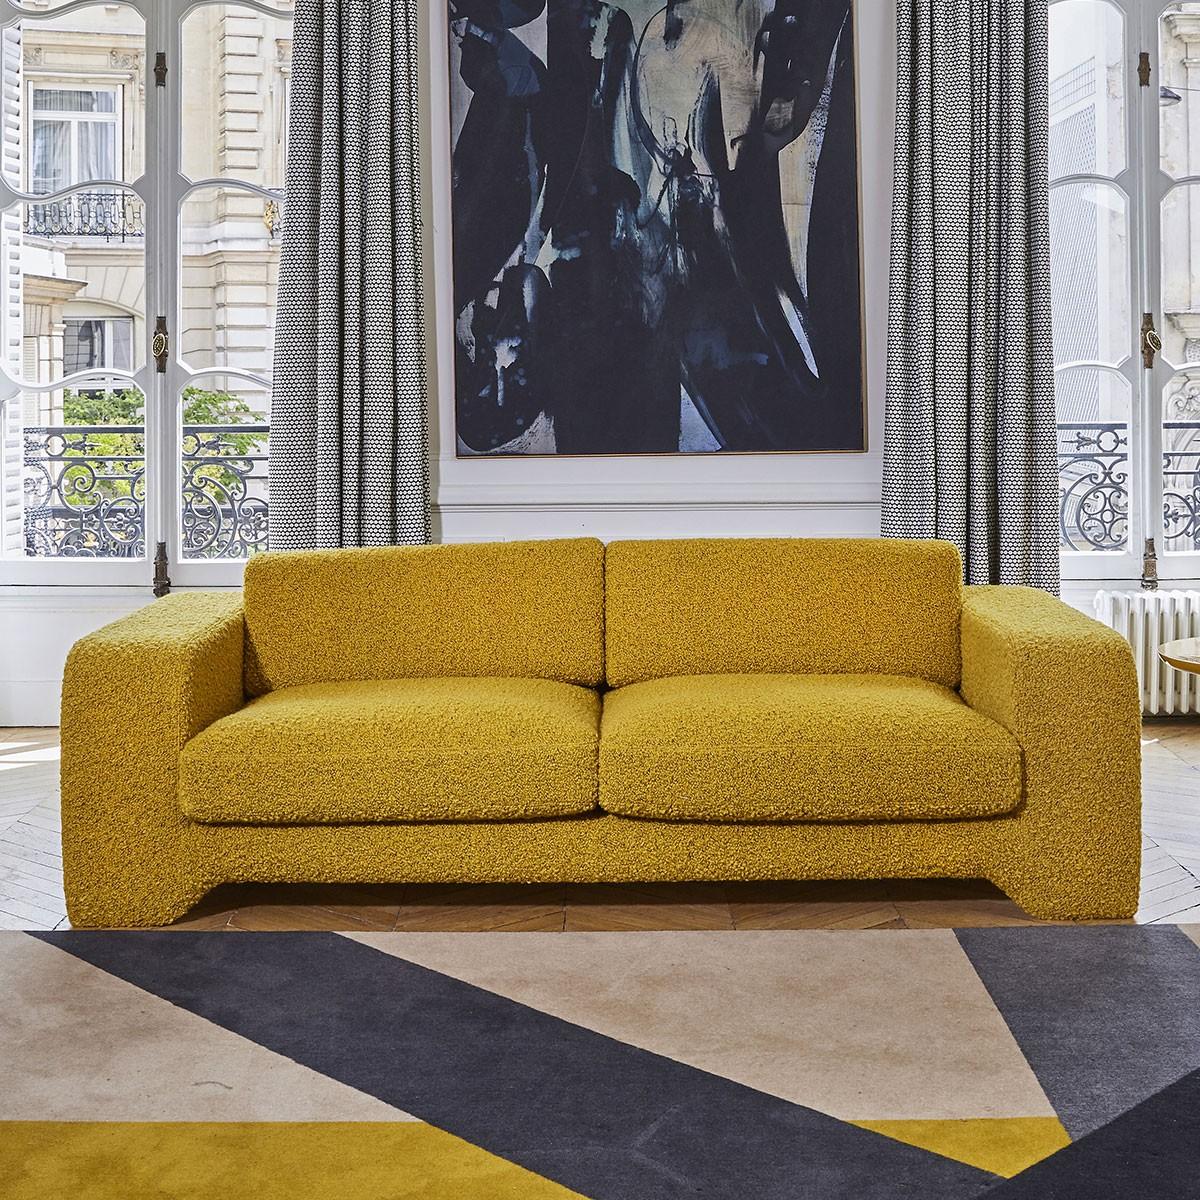 Popus Editions Giovanna 4 seater sofa in Blue Como Velvet Upholstery

Giovanna is a sofa with a strong profile. A sober, plush line, with this famous detail that changes everything, so as not to forget its strength of character and this charming